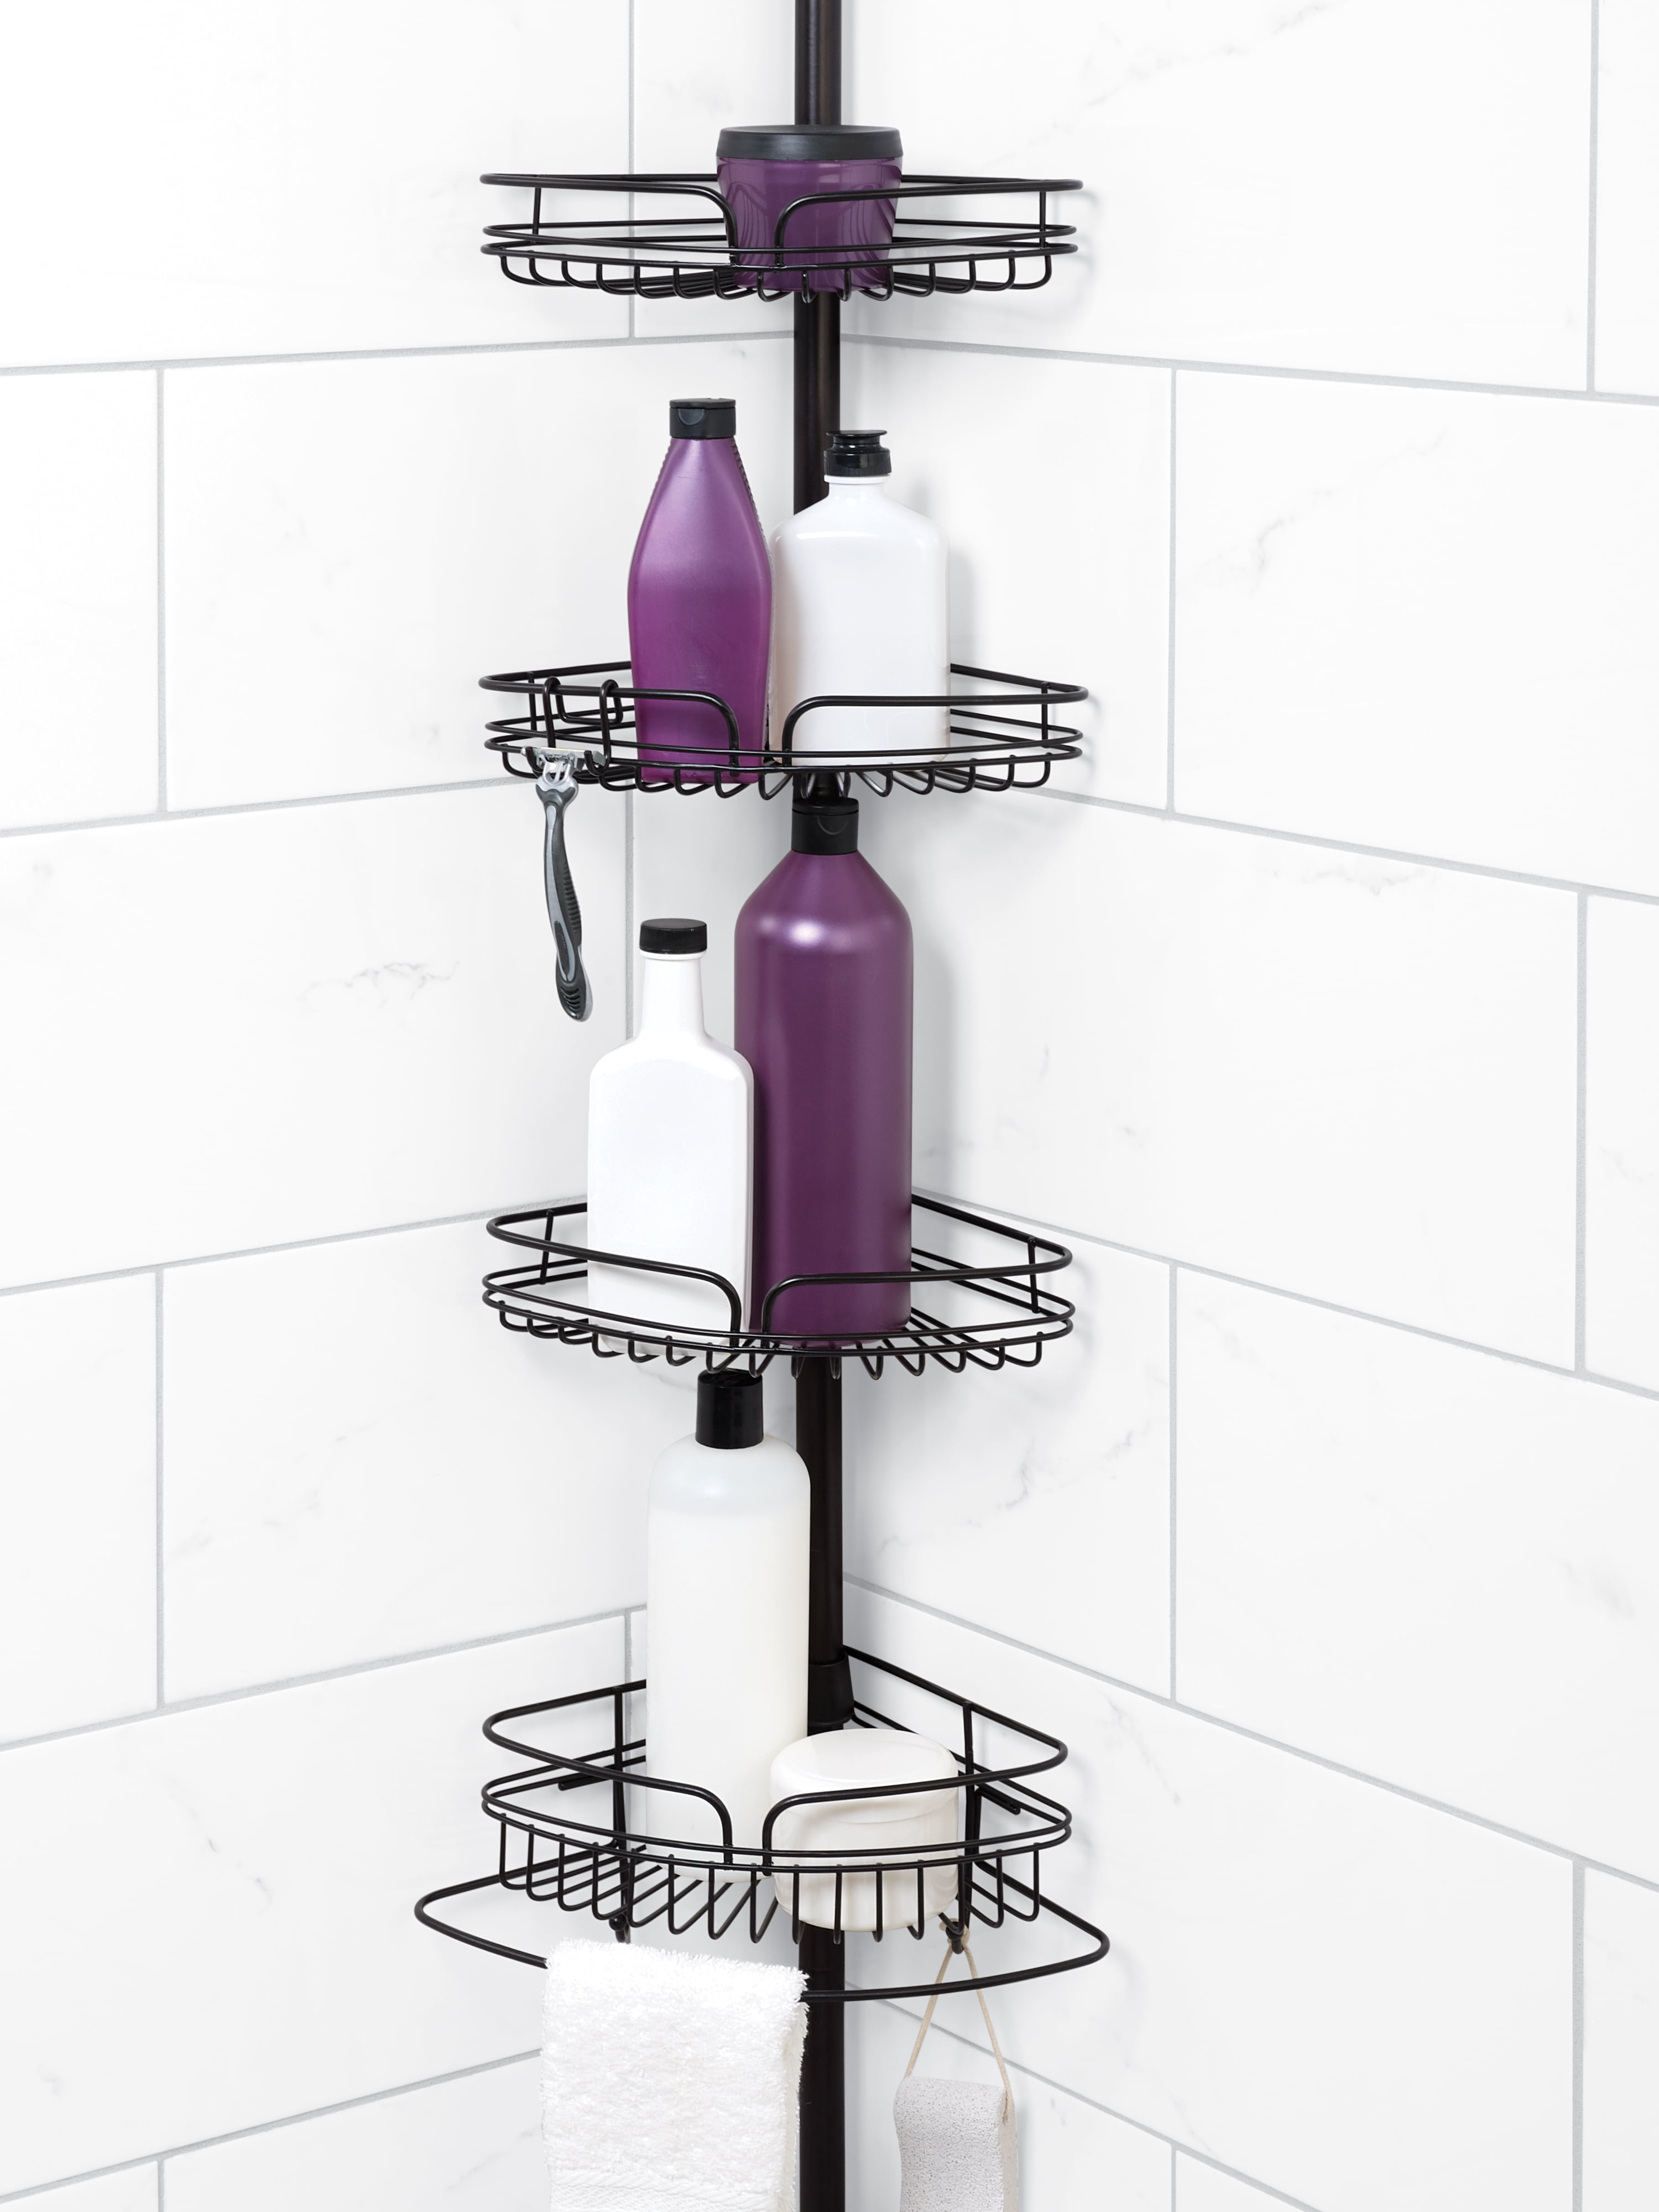 Oil Rubbed Bronze Details about   Zenna Home Shower Tension Pole Caddy 